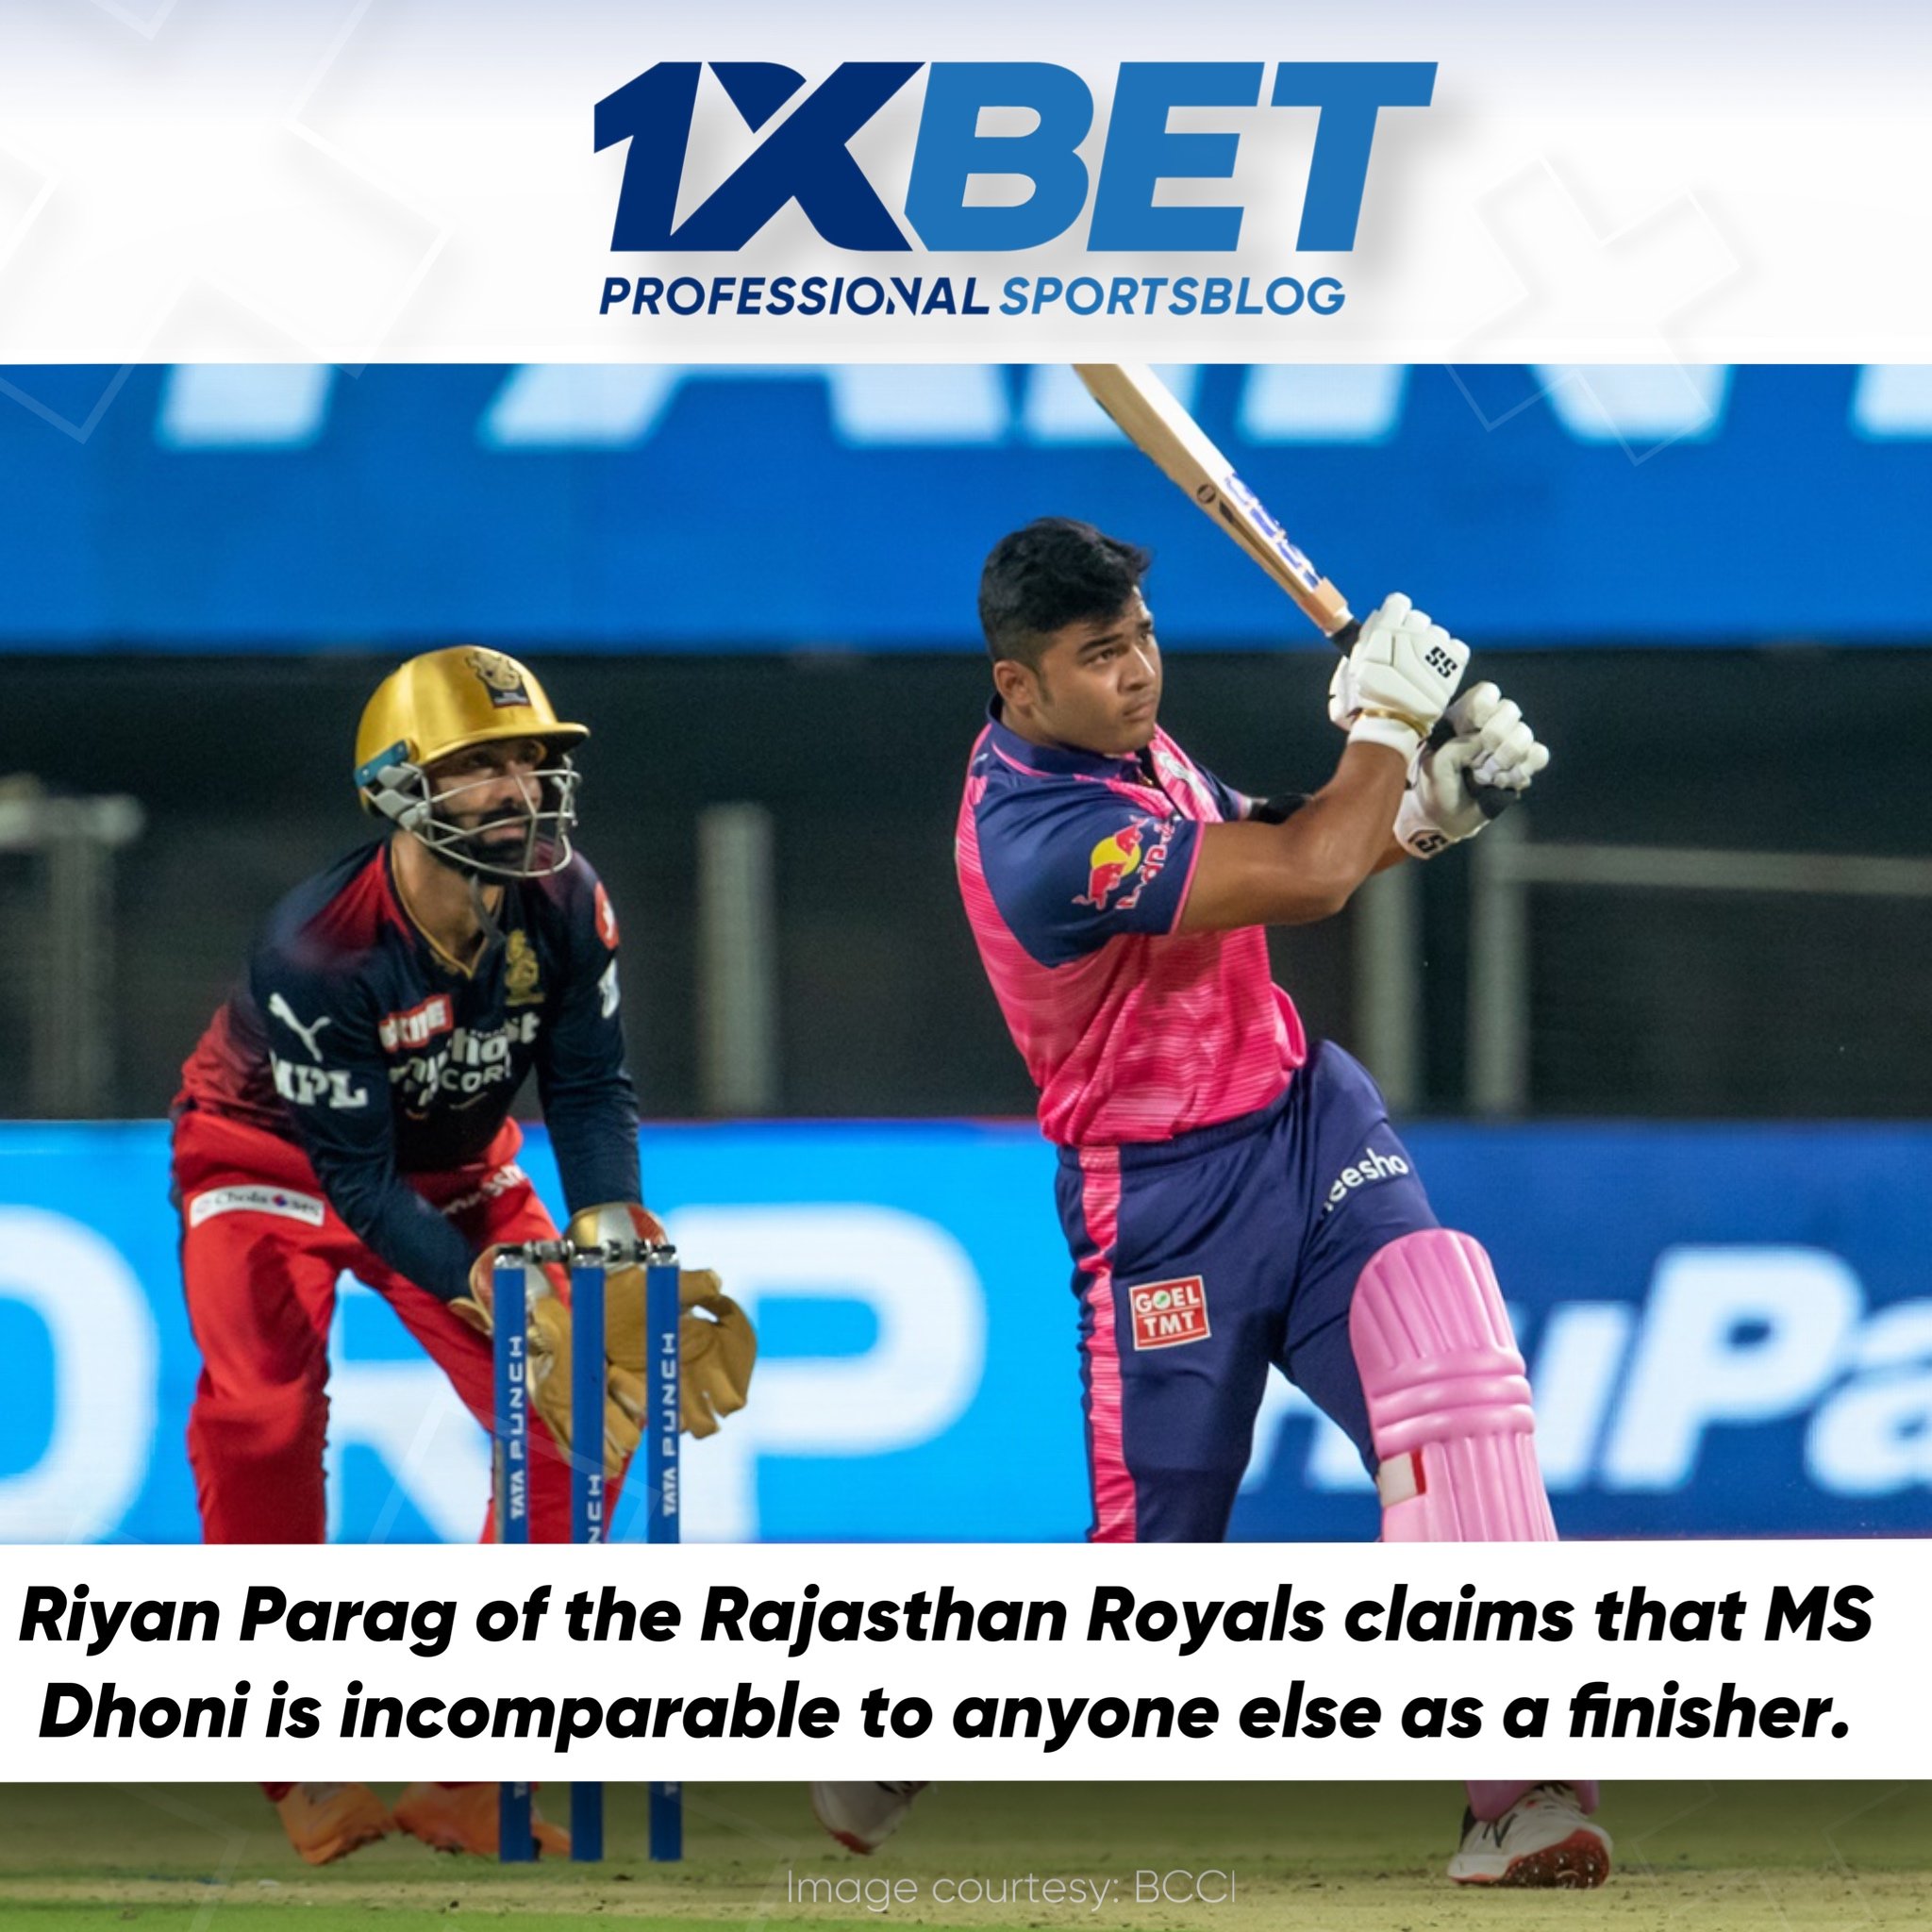 Riyan Parag of the Rajasthan Royals claims that MS Dhoni is incomparable to anyone else as a finisher.